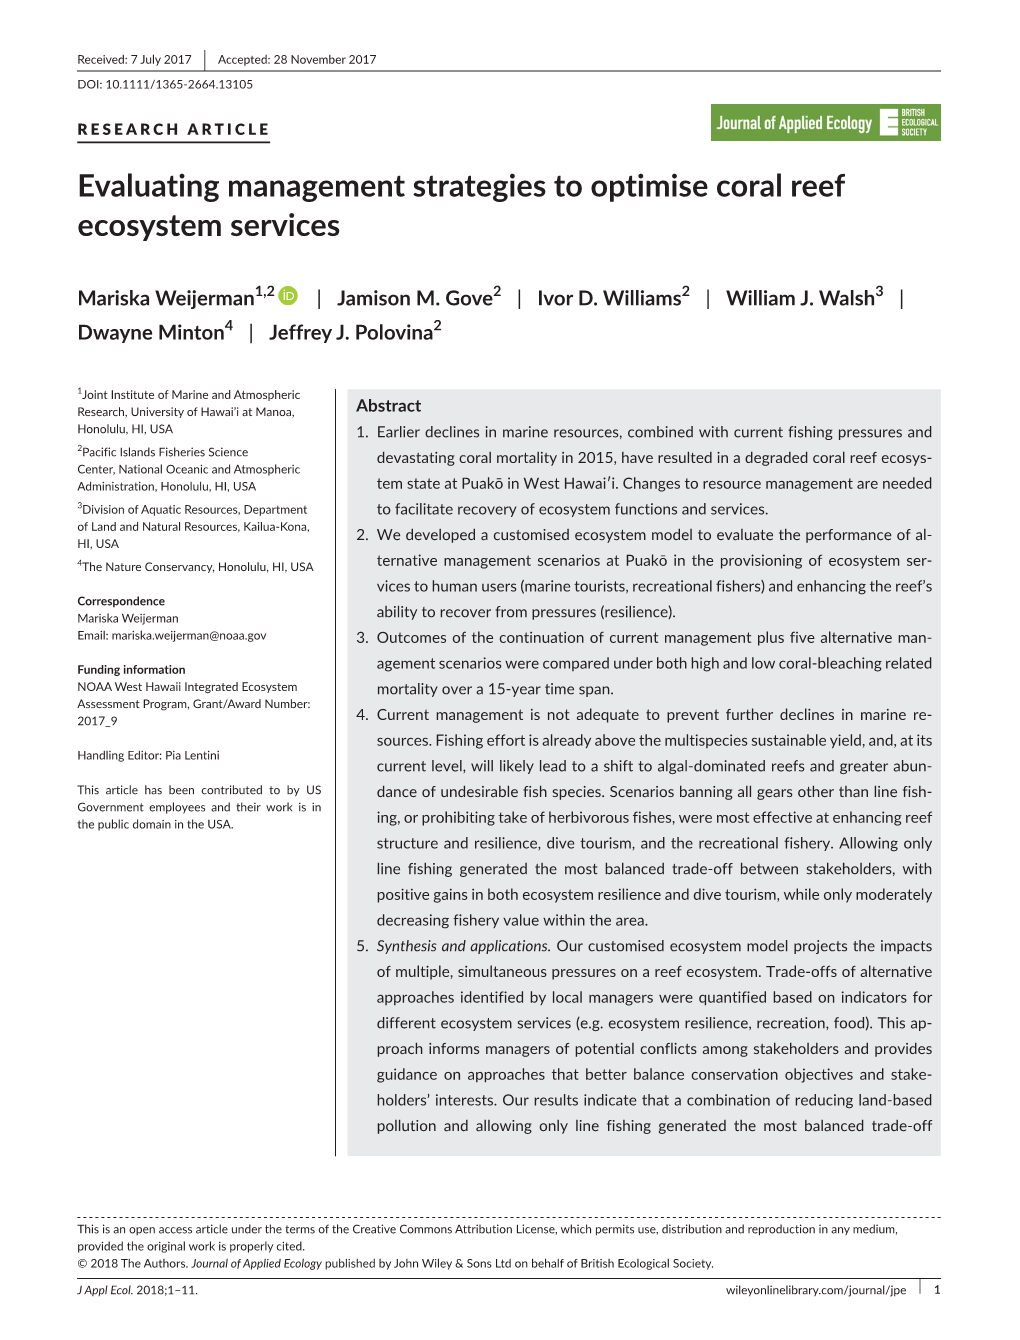 Evaluating Management Strategies to Optimise Coral Reef Ecosystem Services